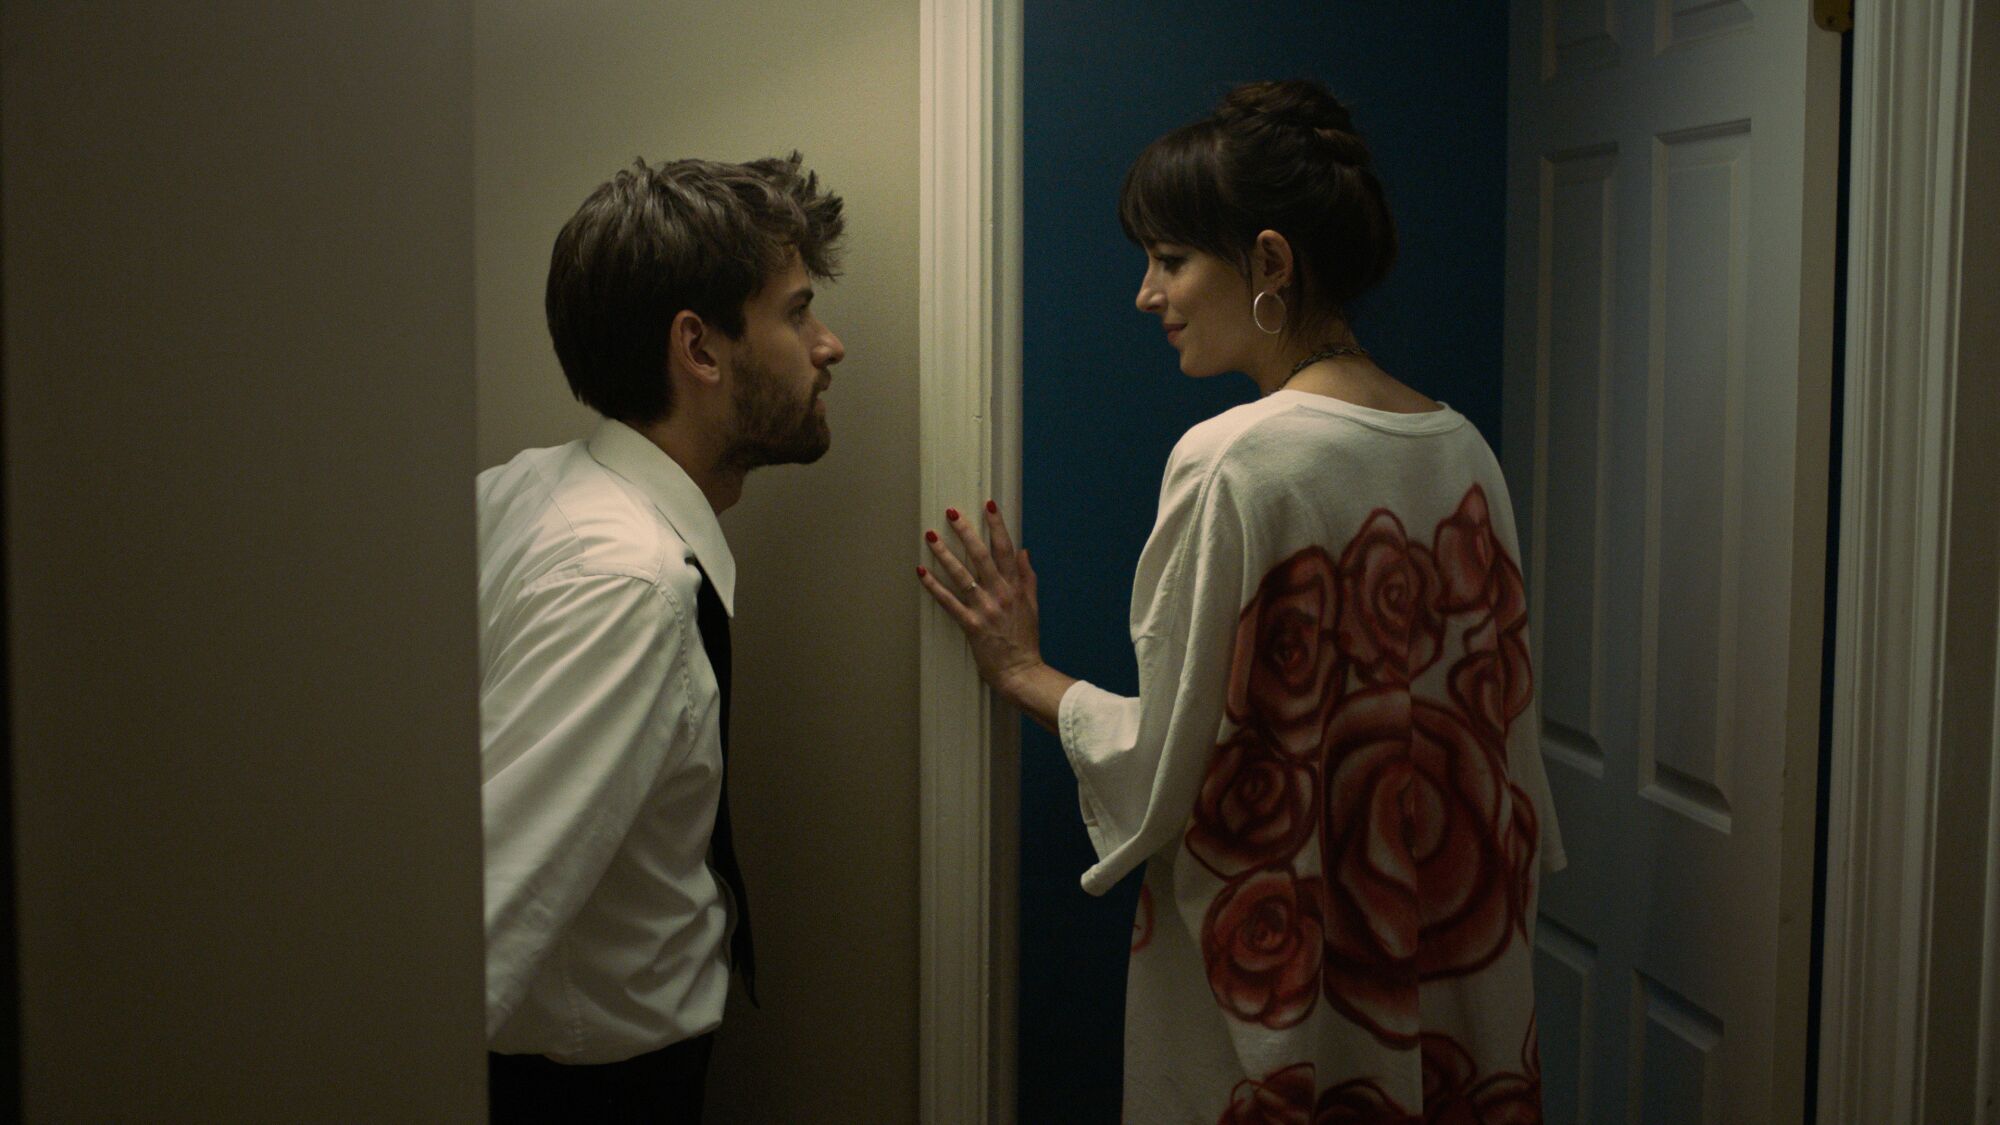 A man and a woman linger in a doorway, looking at one another.